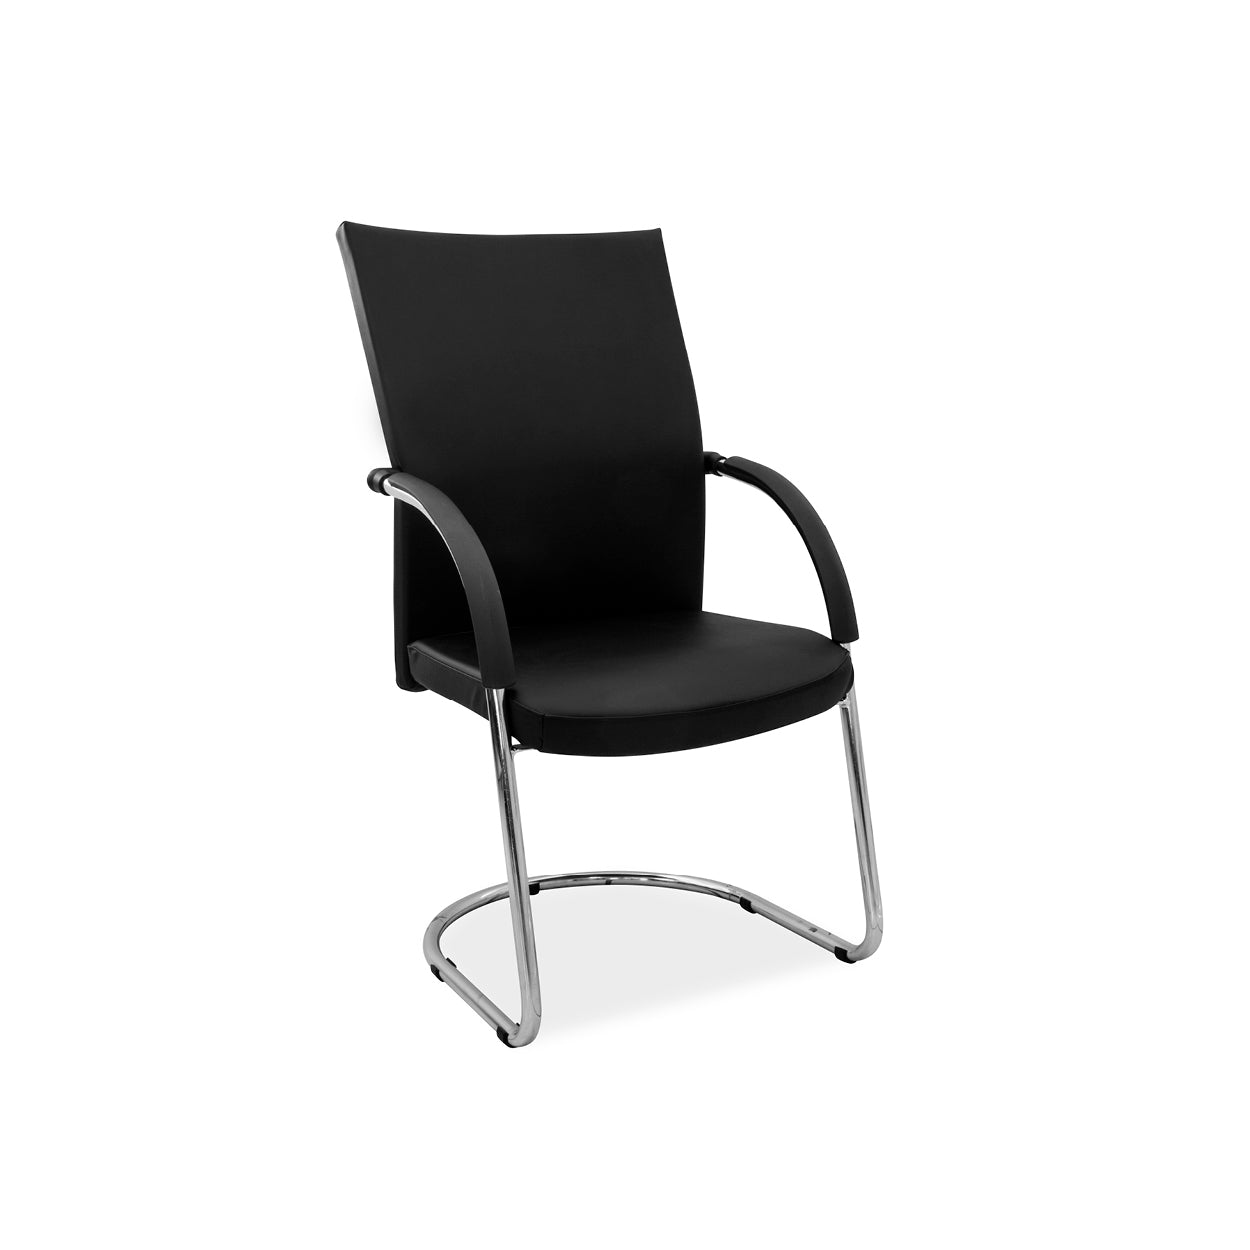 Hedcor Anglo visitors chair